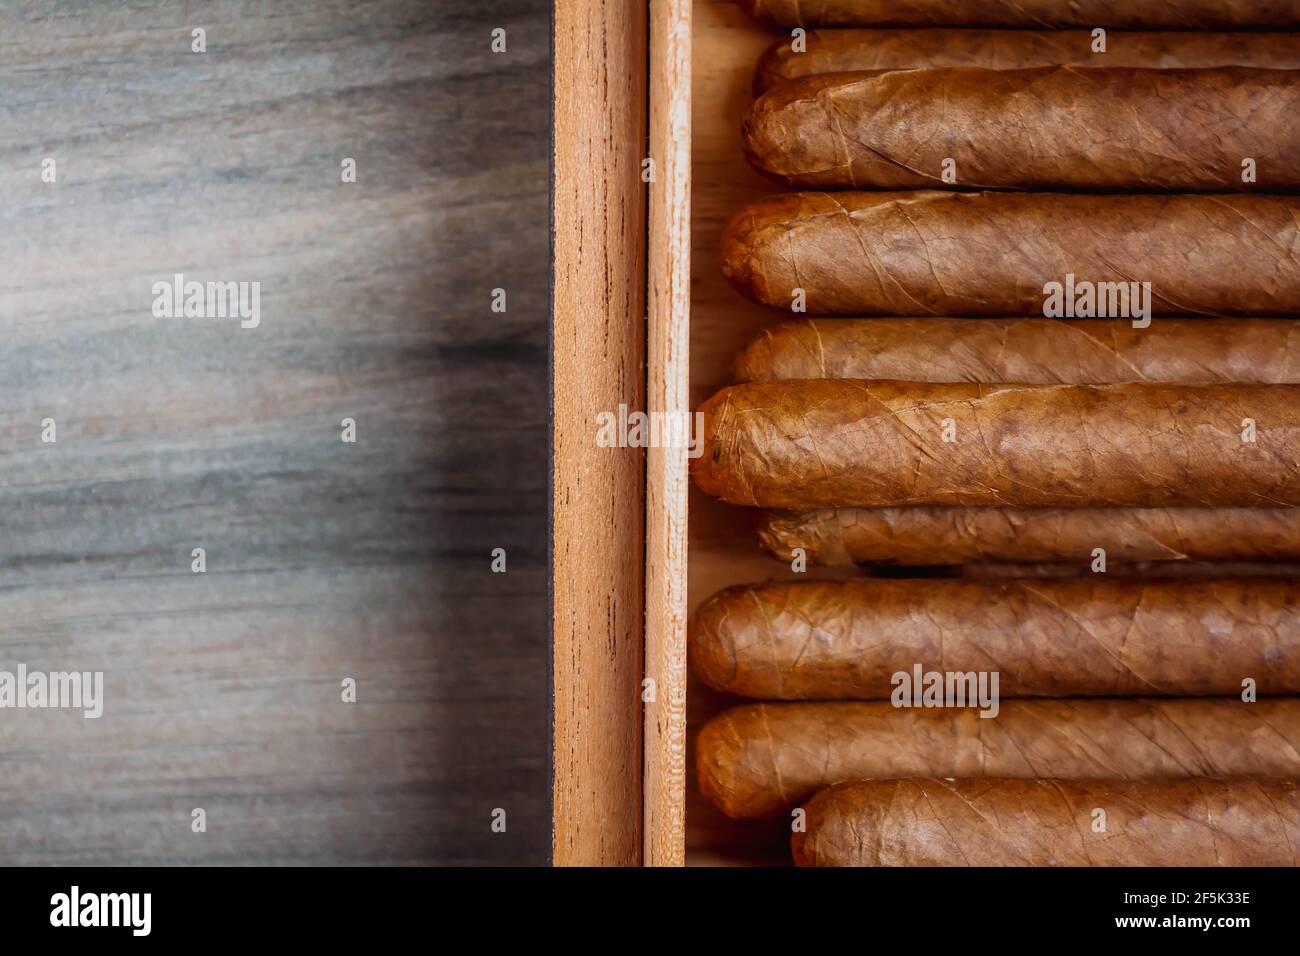 Cigars in humidor on the wooden background Stock Photo